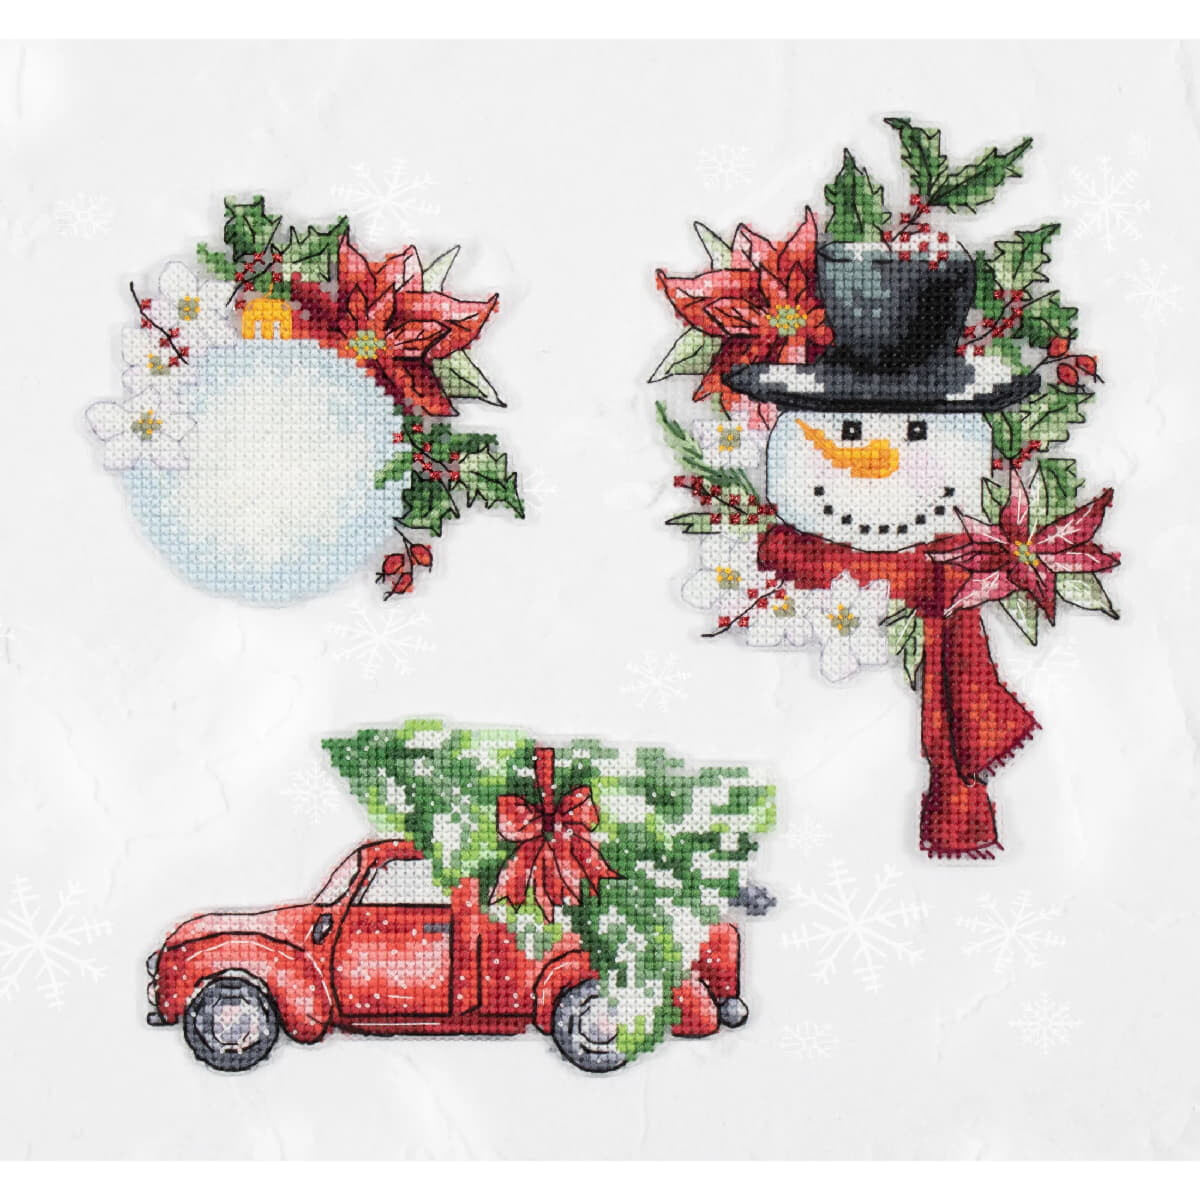 Luca-S counted cross stitch kit "Toys kit Ornament...